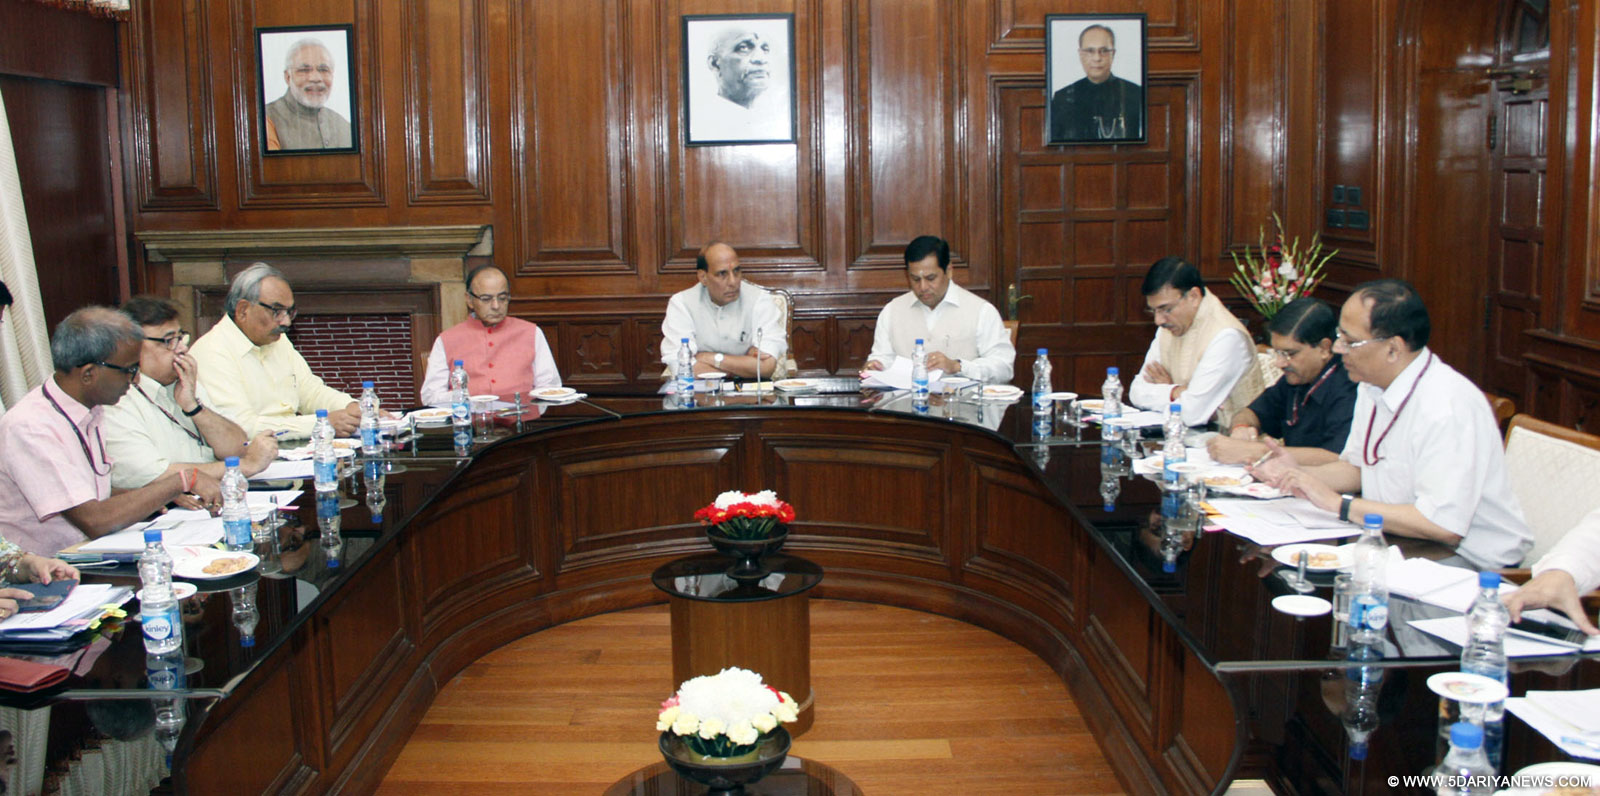 Union Home Minister Rajnath Singh presides over a meeting to review preparations for the Rashtriya Ekta Diwas (National Unity Day), in New Delhi on Oct 23, 2015. Also seen Union Minister for Finance, Corporate Affairs and Information and Broadcasting Arun Jaitley, Union Minister of State for Youth Affairs and Sports (Independent Charge) Sarbananda Sonowal and others. 